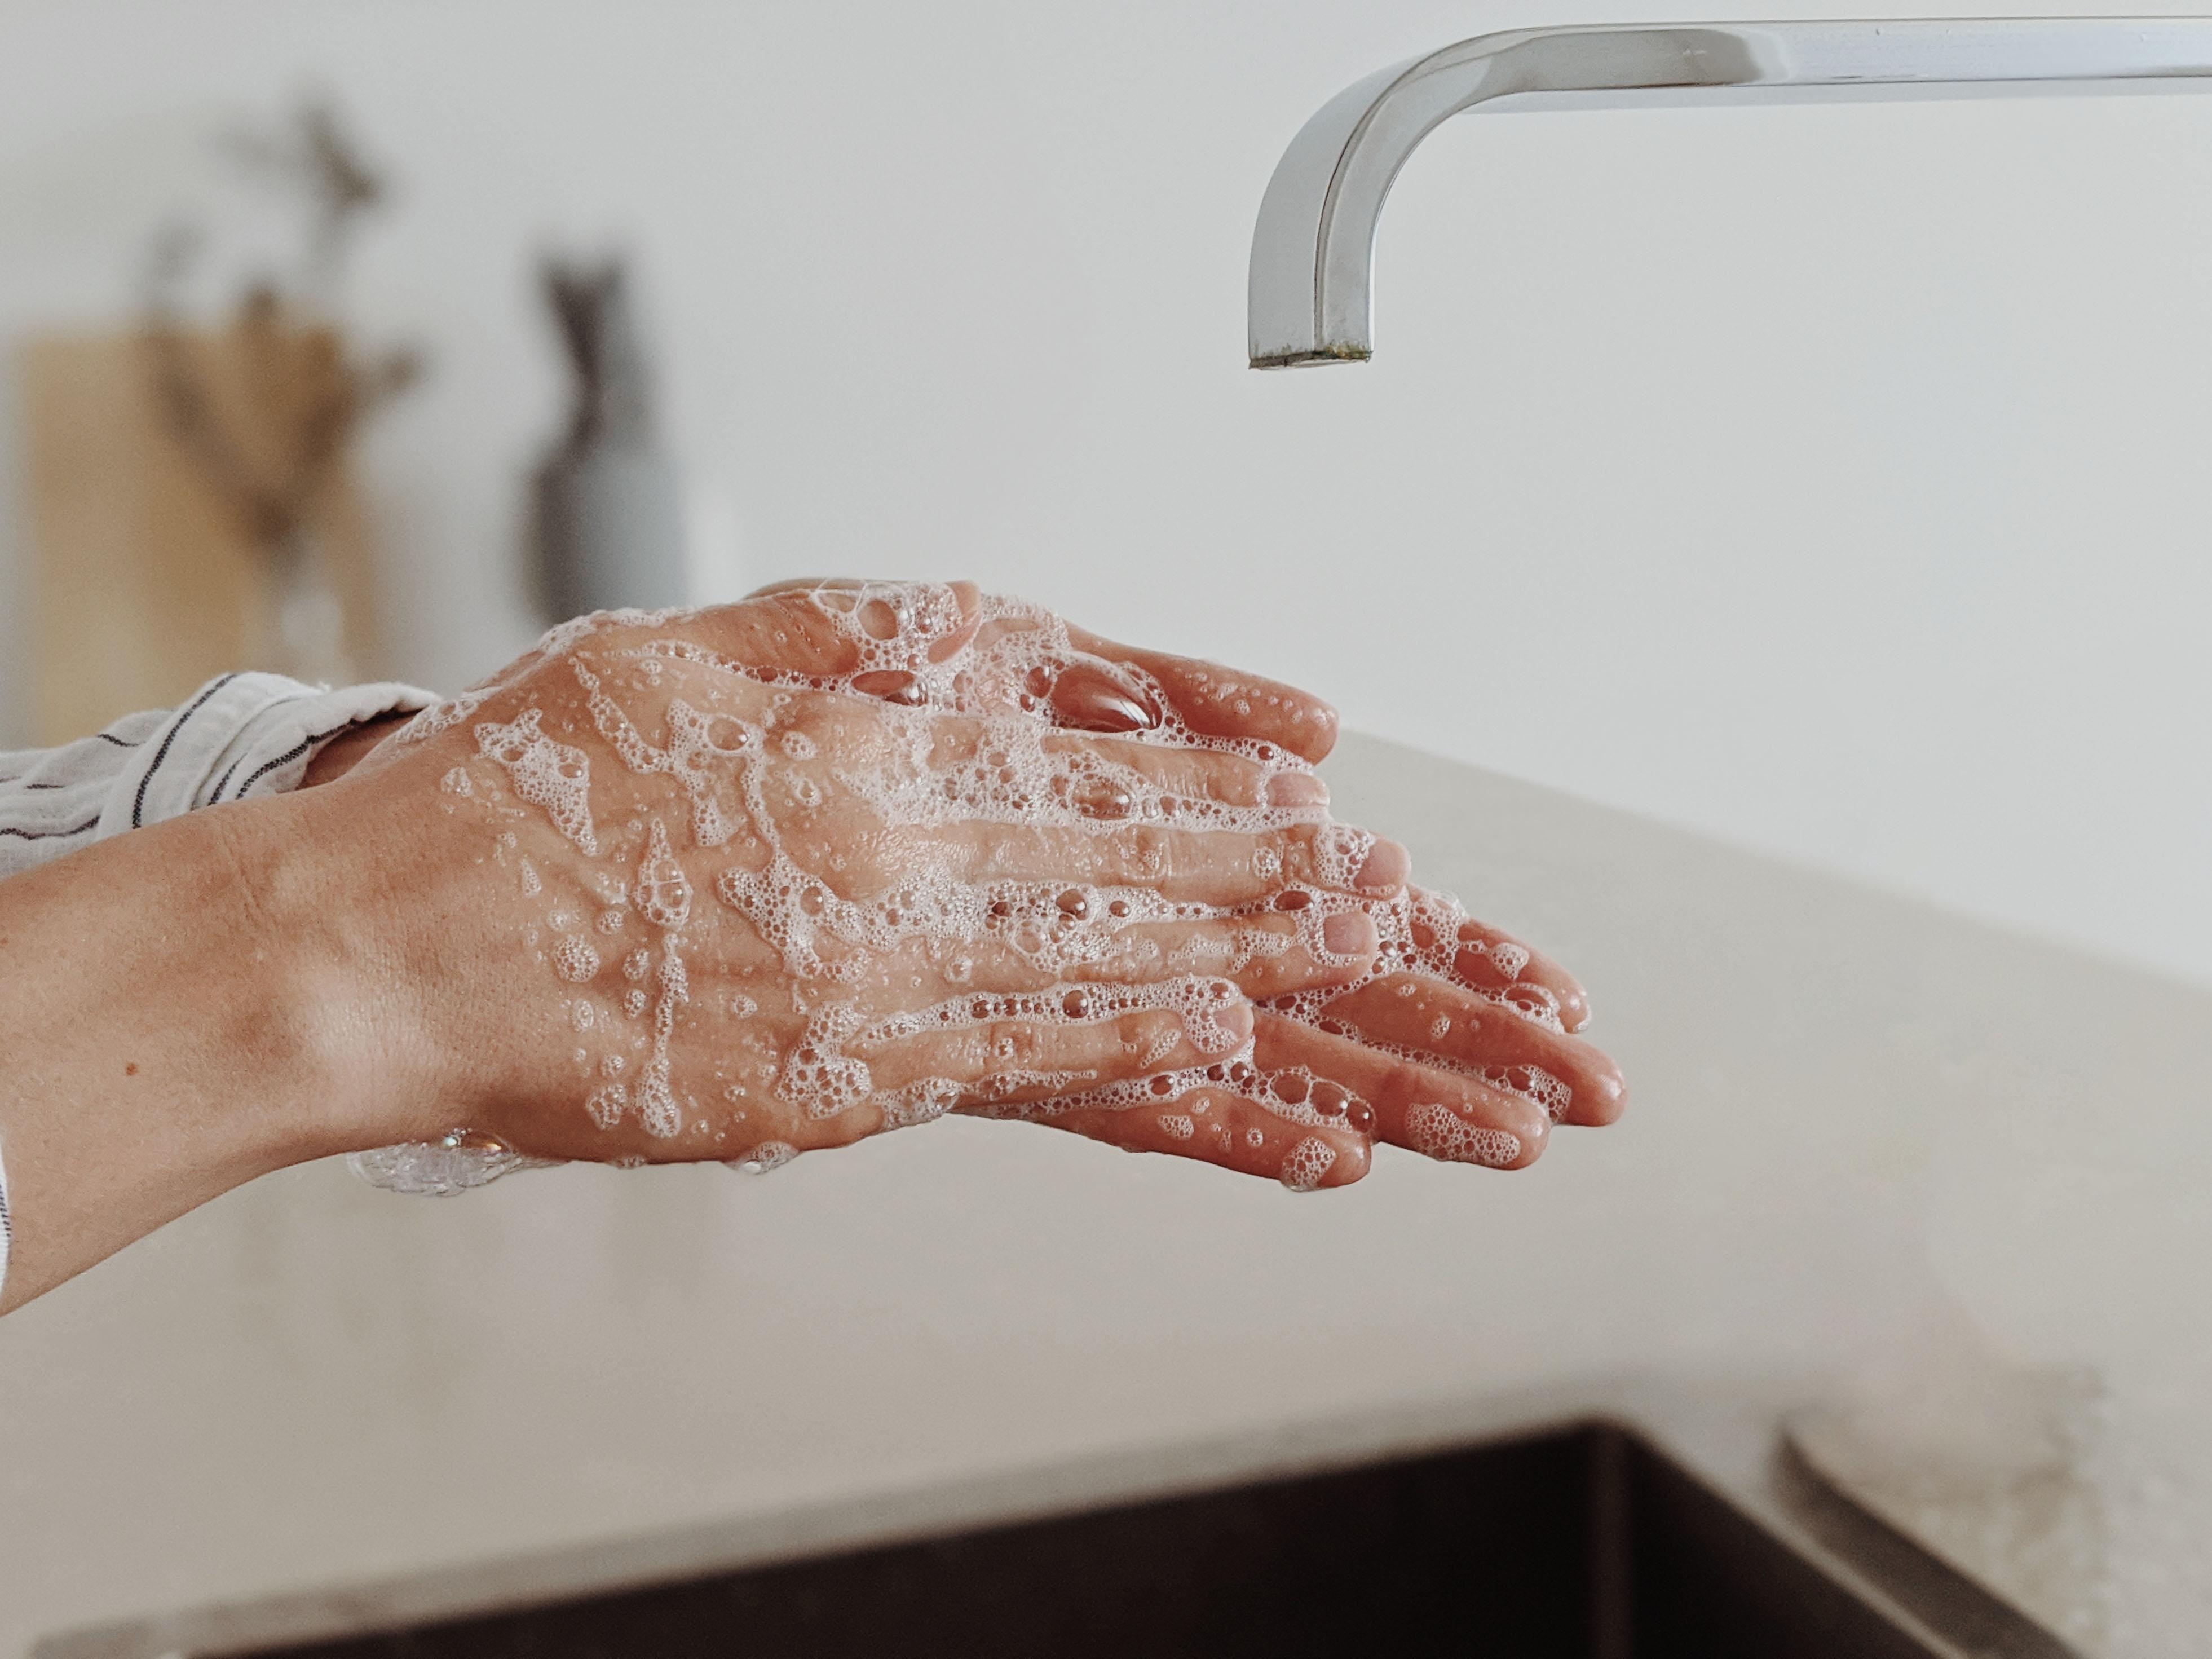 washing of hands can save lives